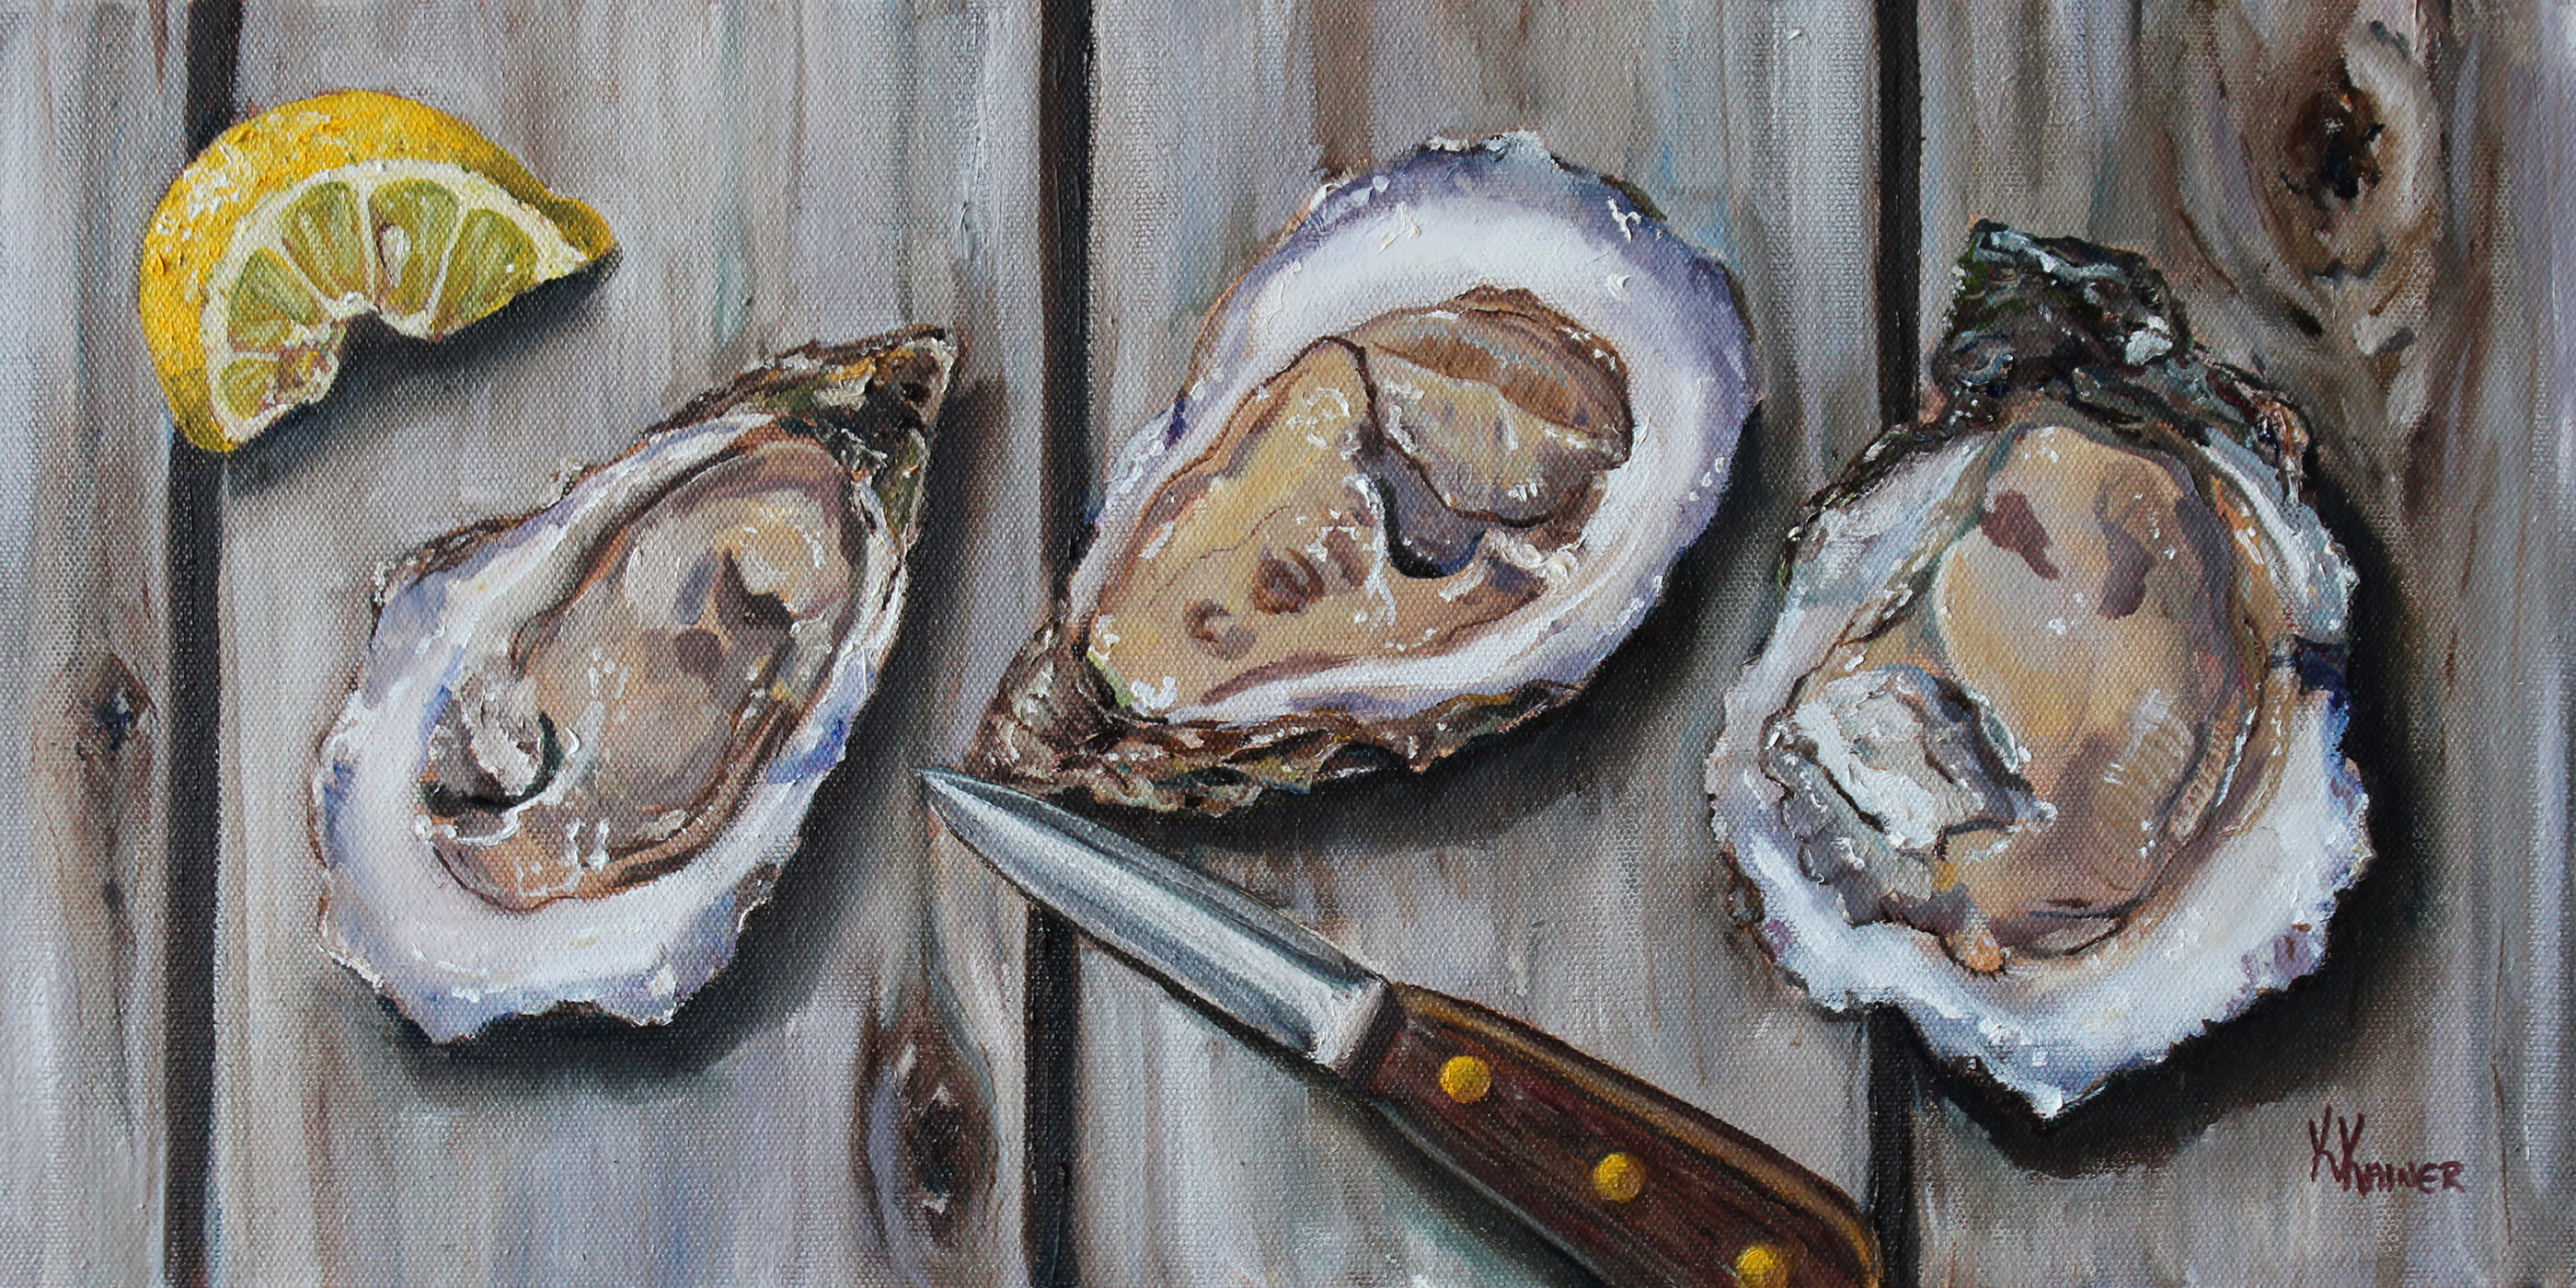 Shucked oysters dms7j4